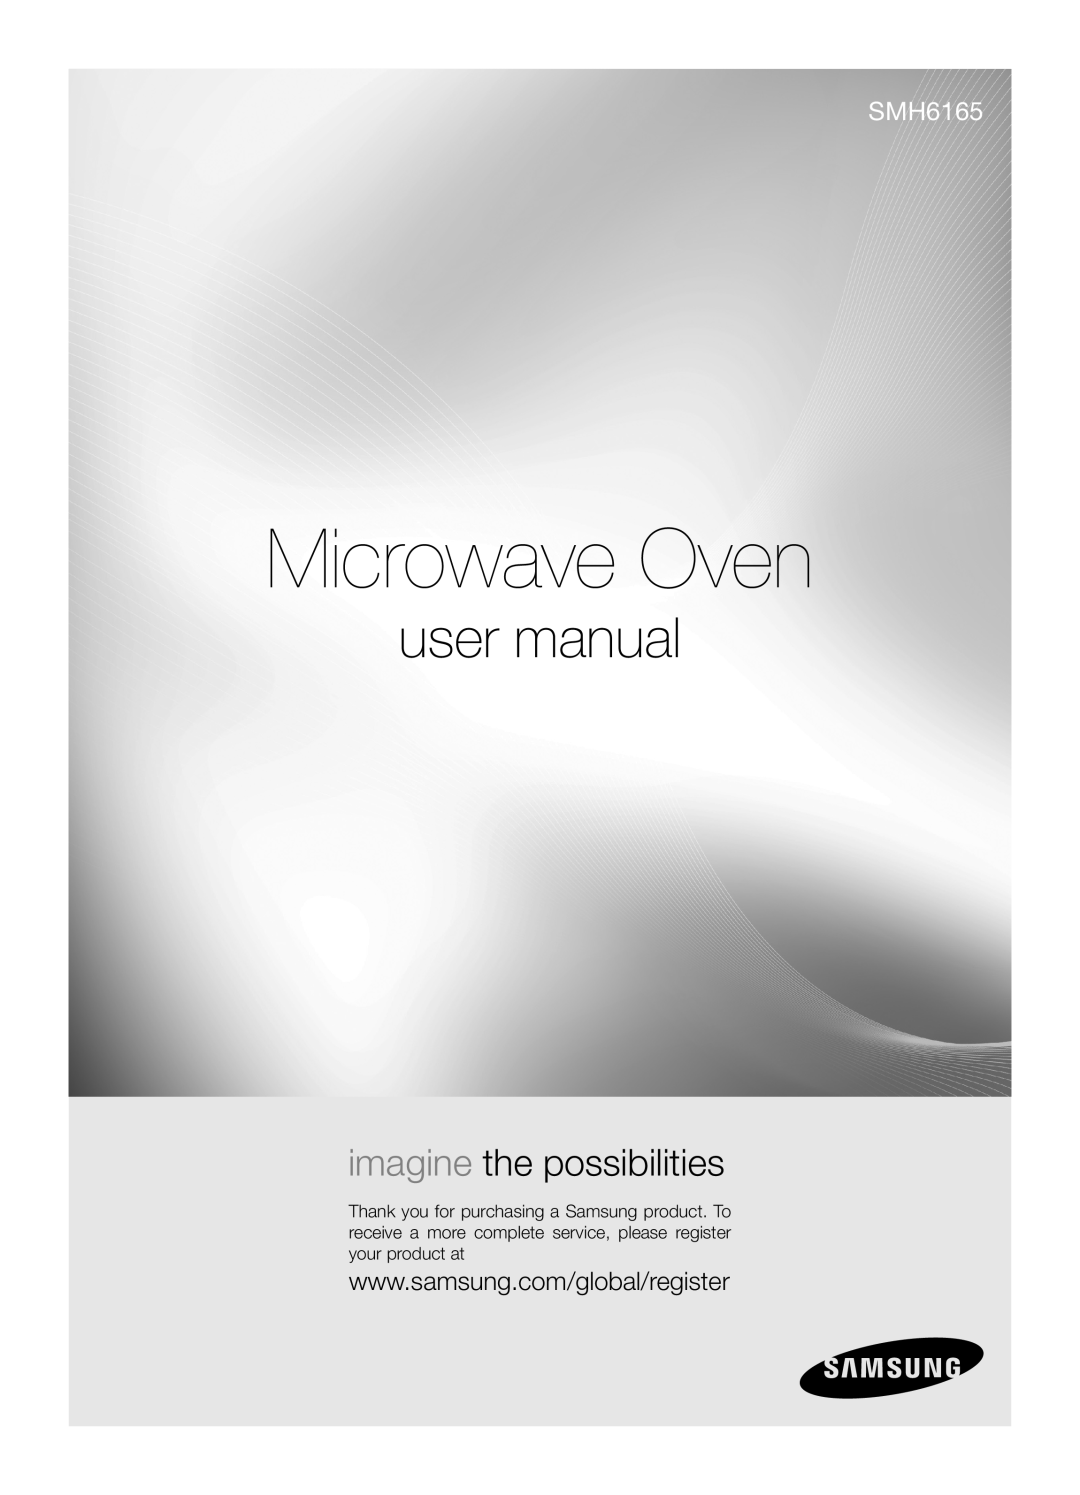 Samsung SMH6165 user manual Microwave Oven, imagine the possibilities 